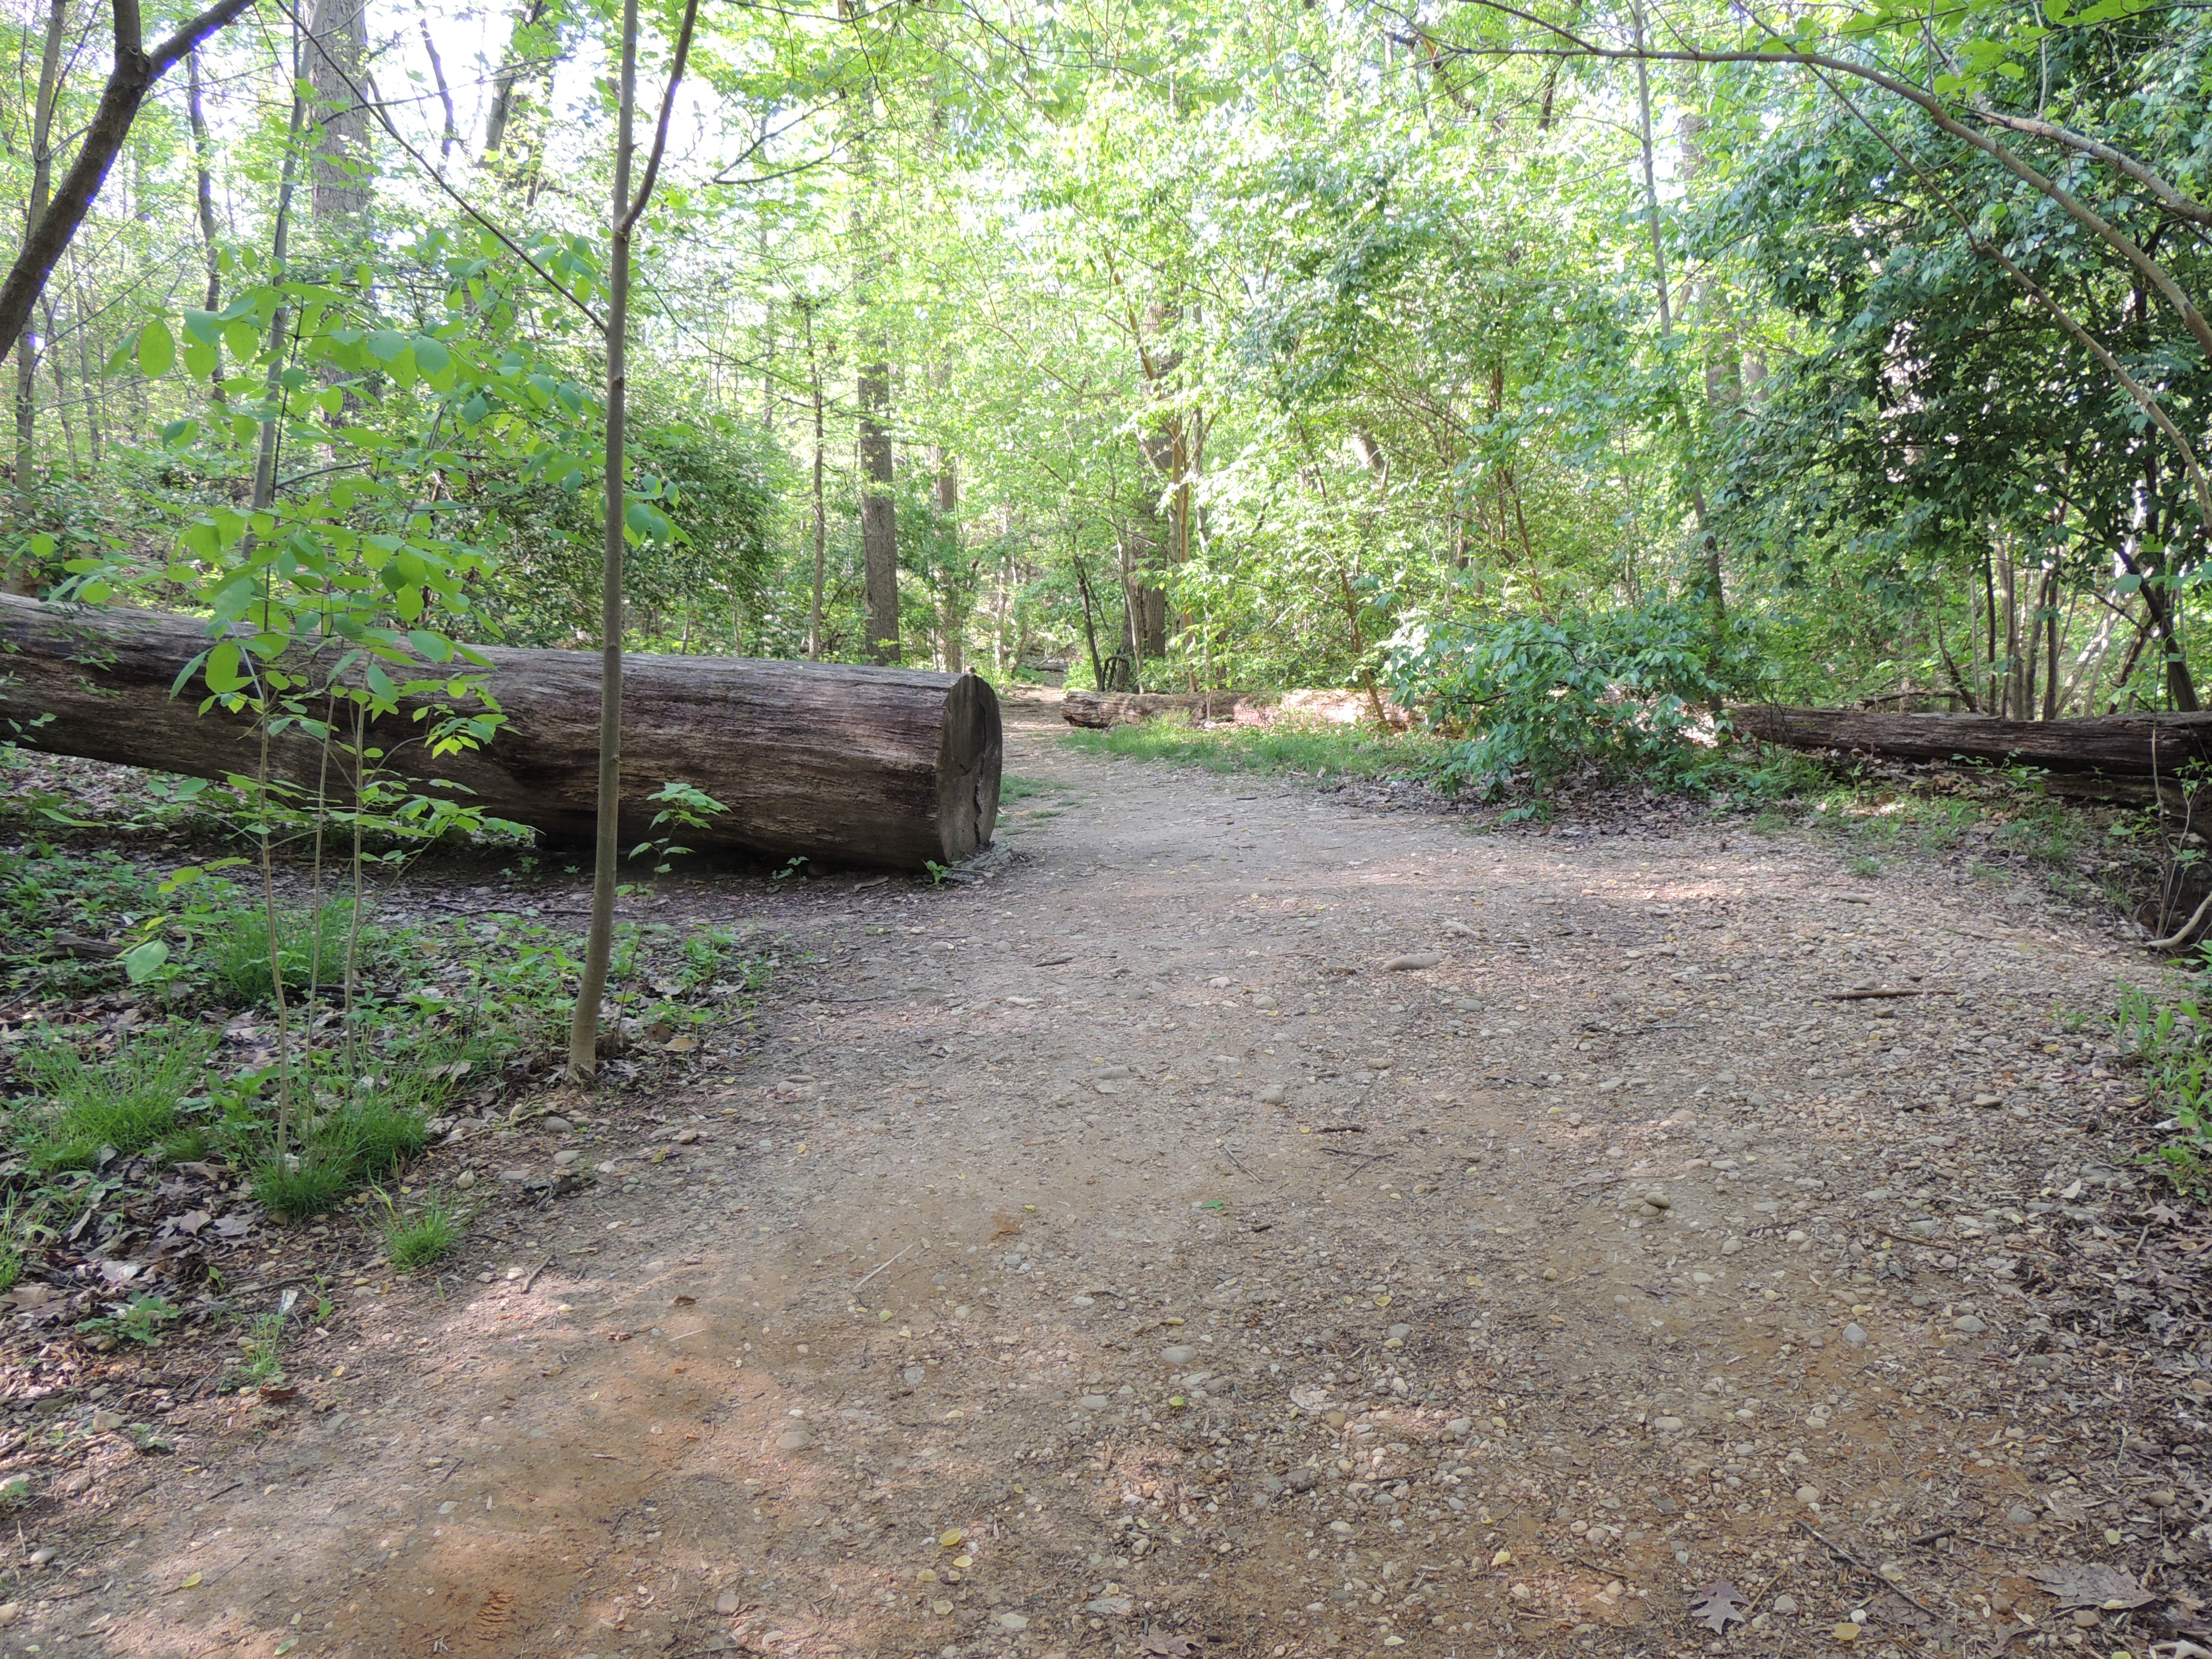 Informal South Boundary of Dog Exercise Area